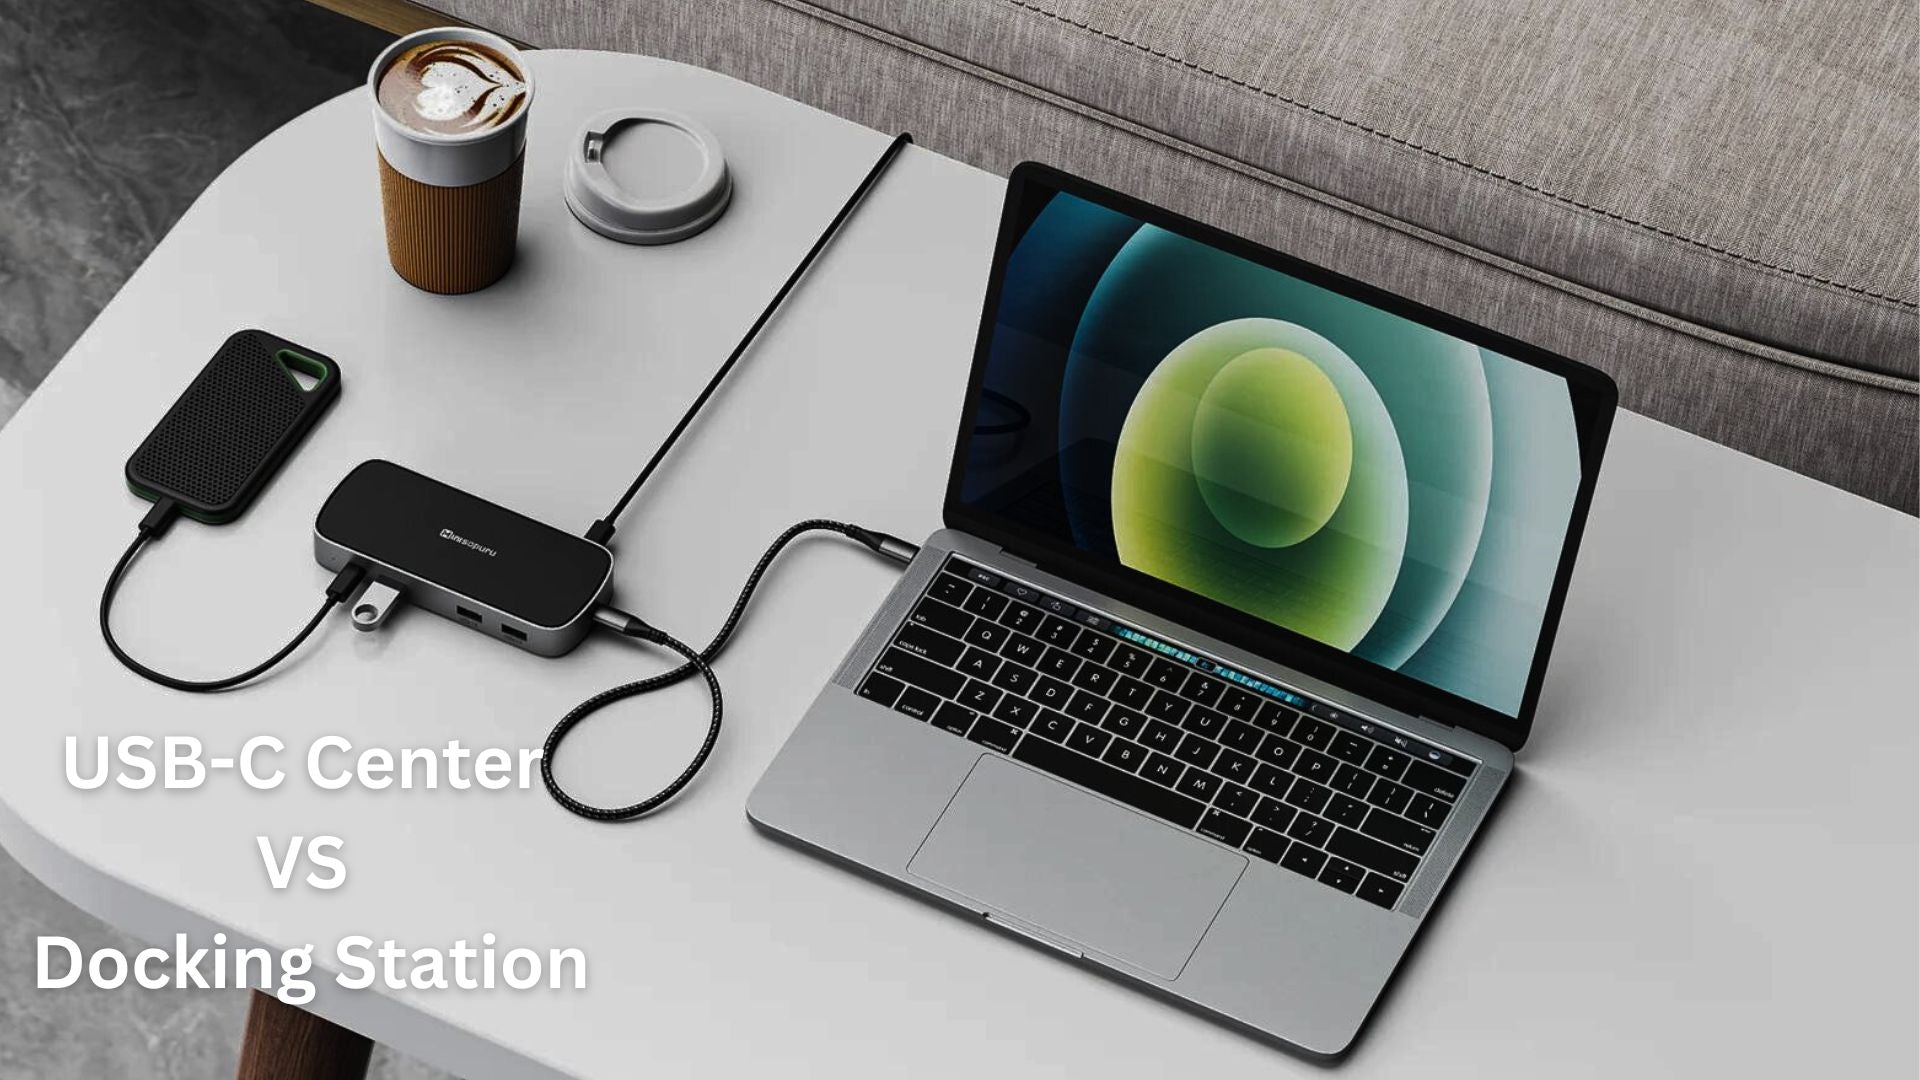 USB-C Center vs. Docking Station: Which is Better For You?